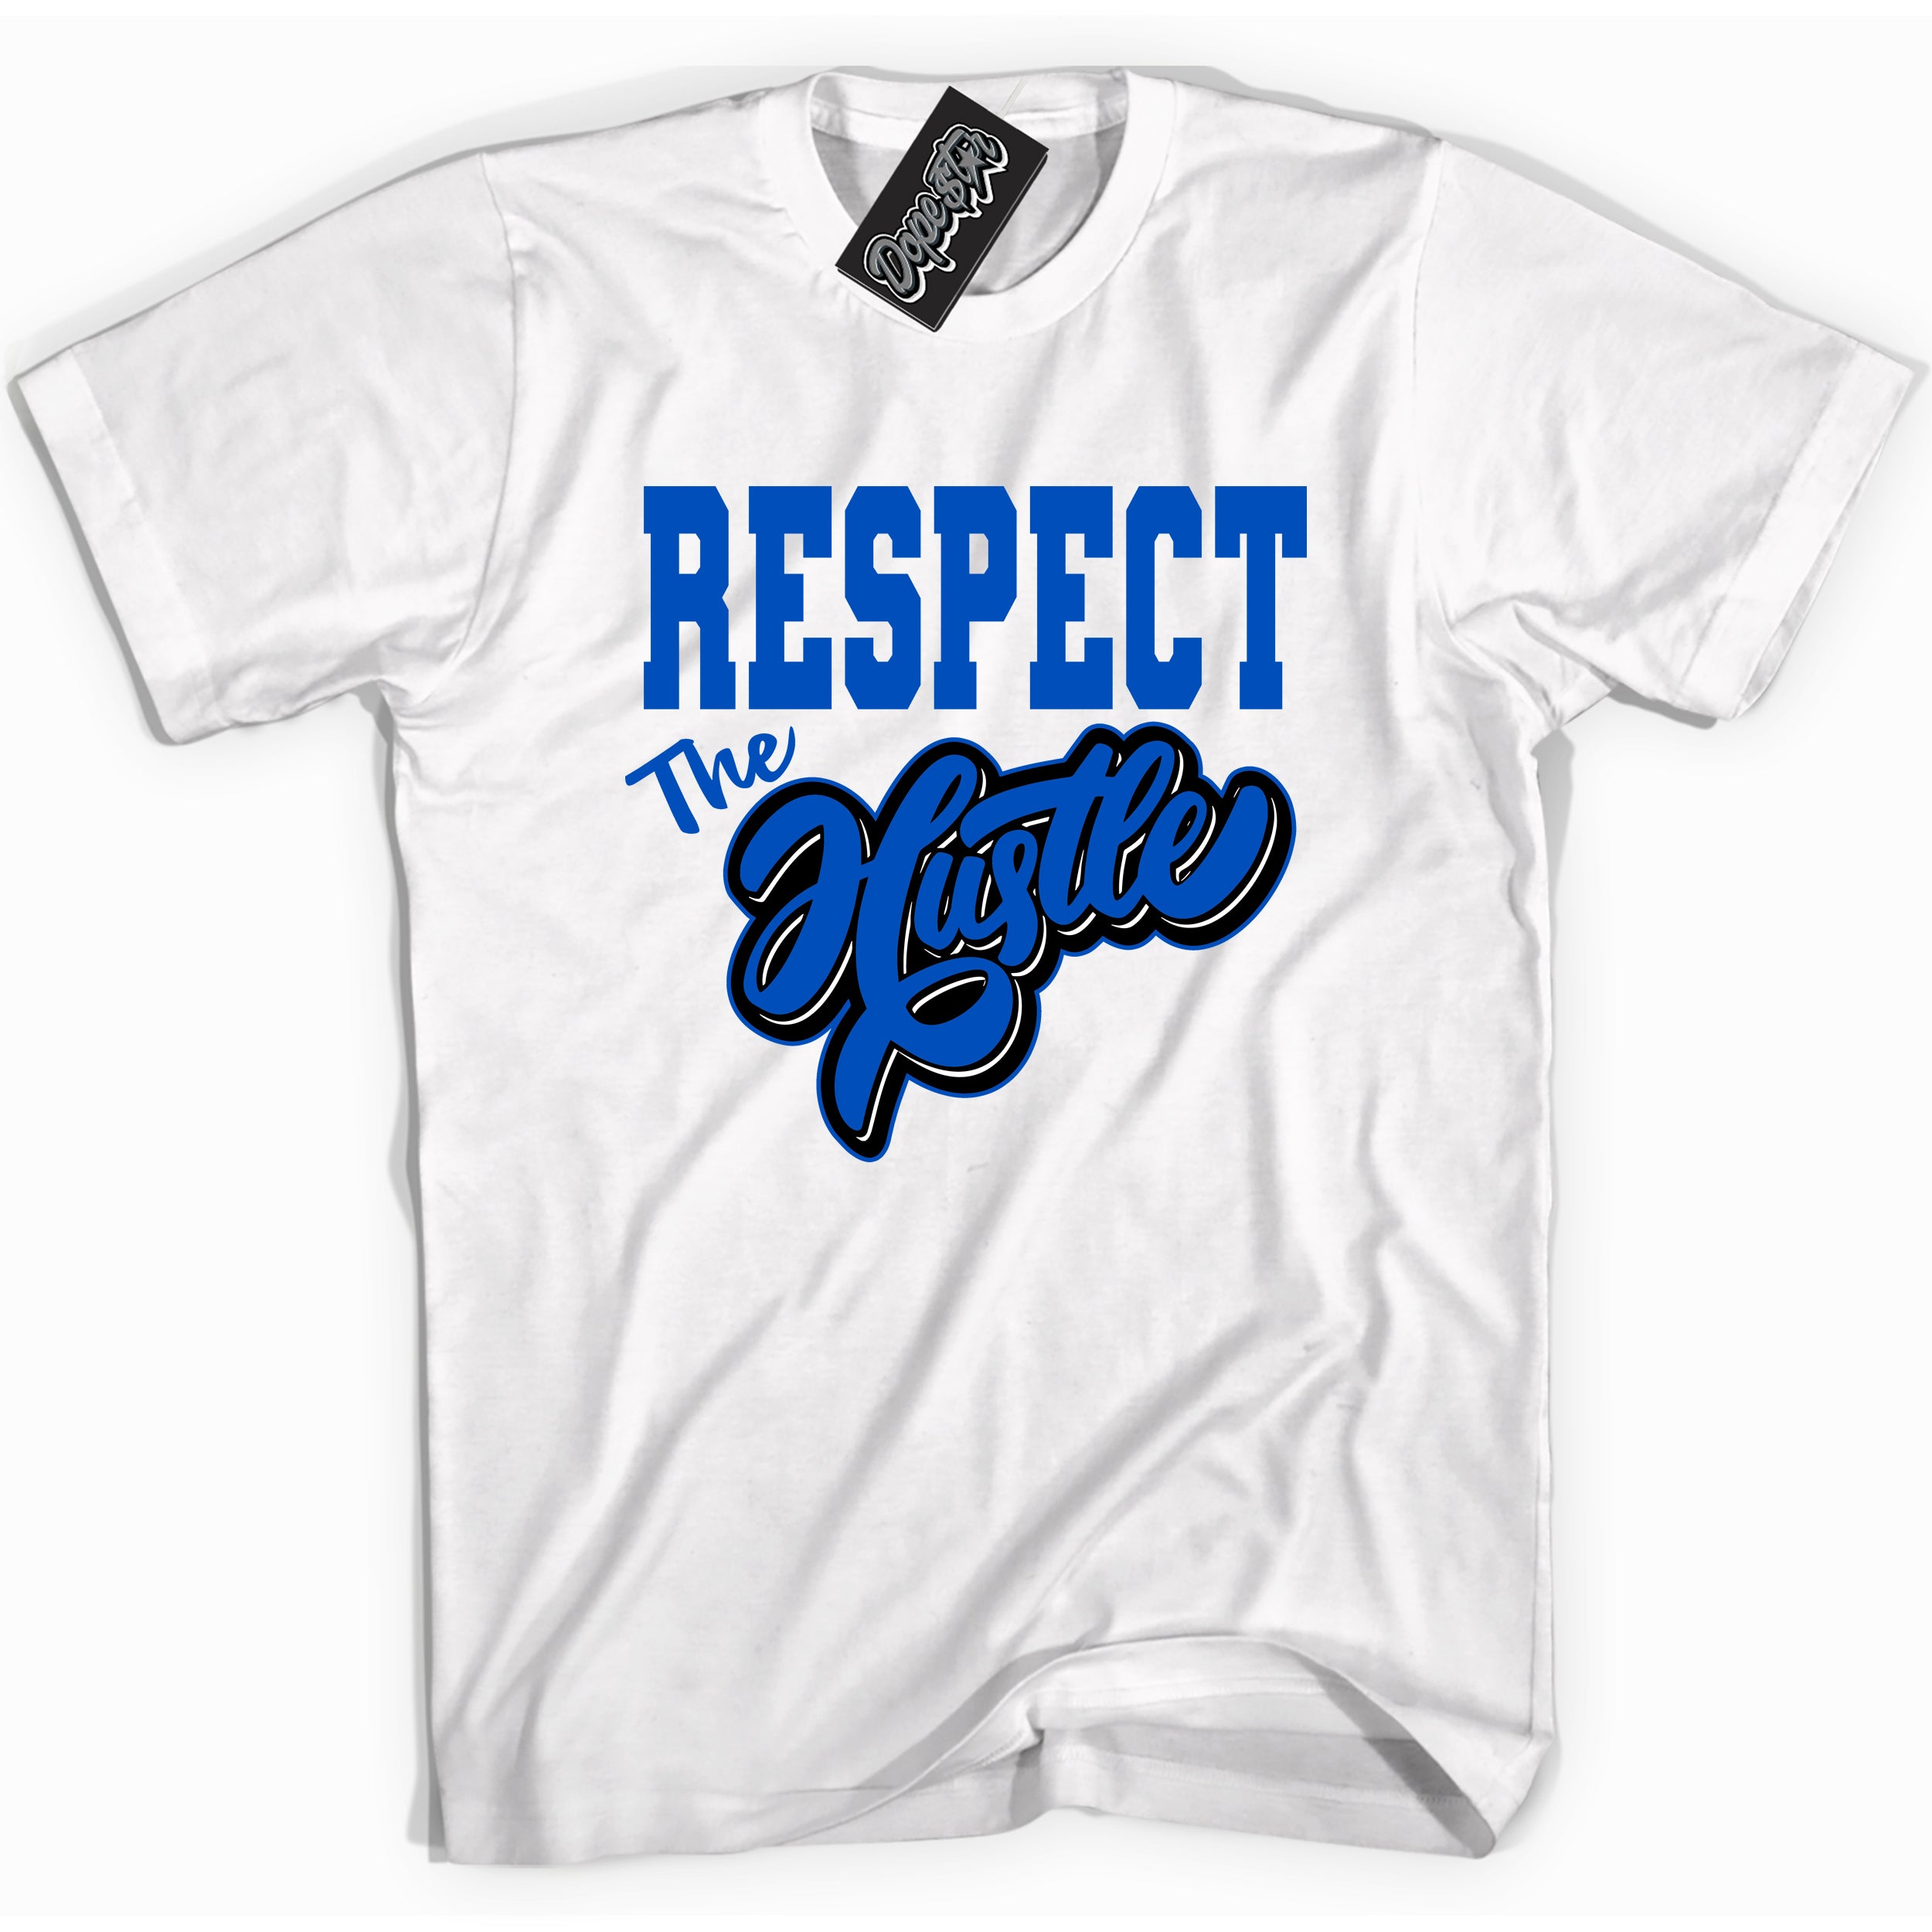 Cool White graphic tee with "Respect The Hustle" design, that perfectly matches Royal Reimagined 1s sneakers 